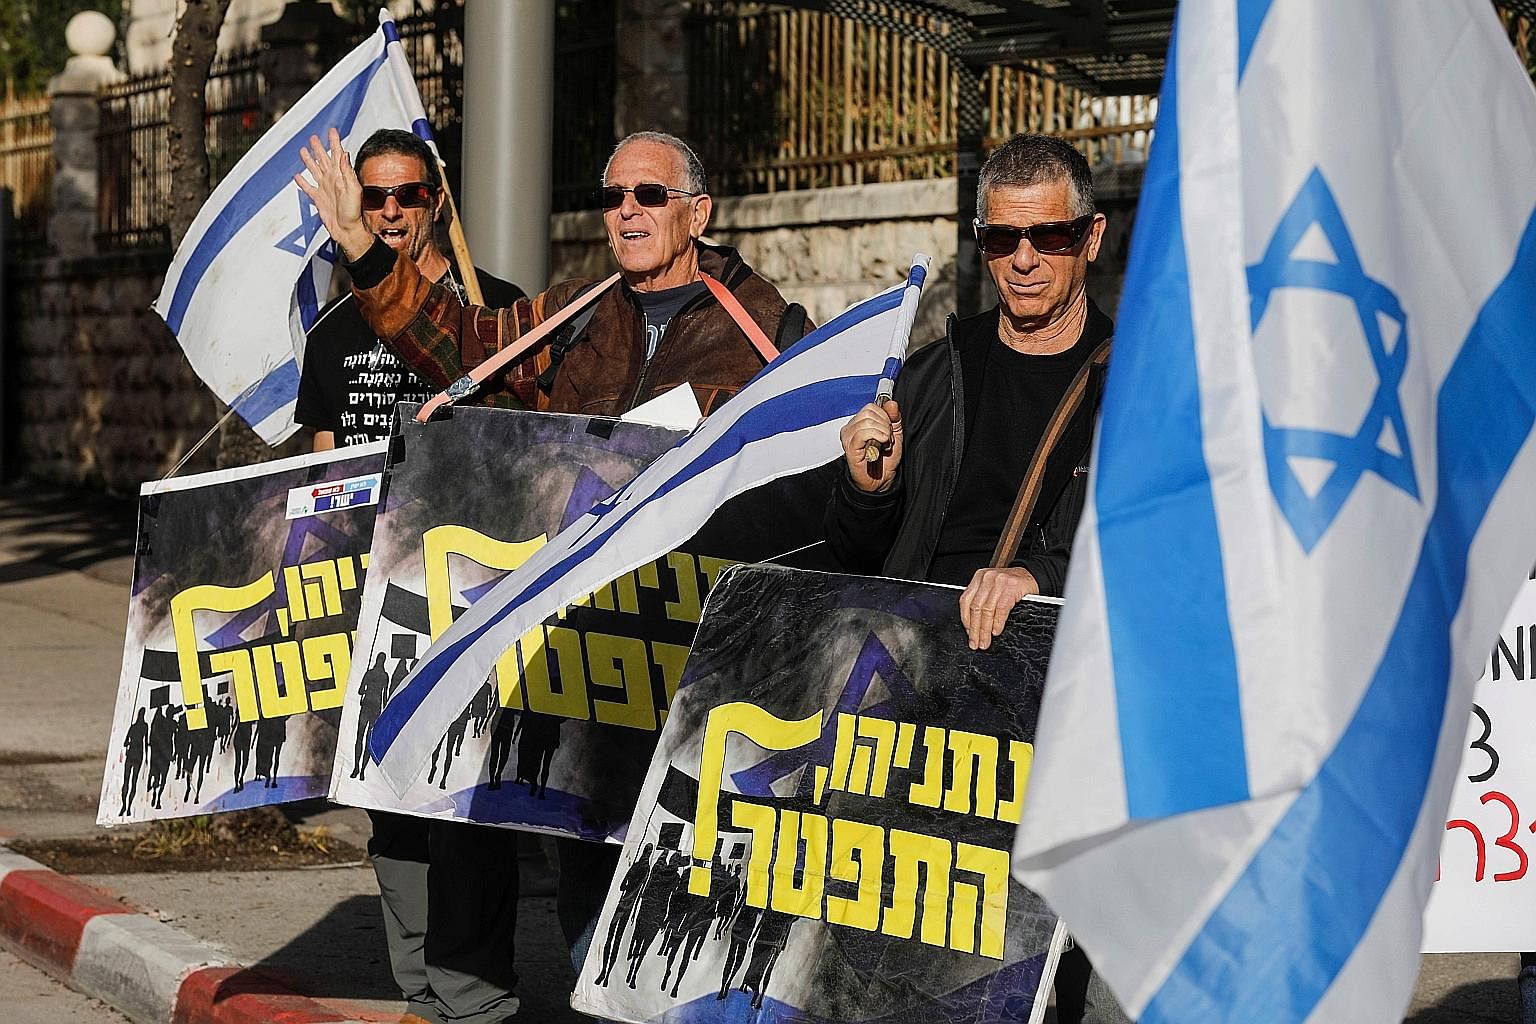 Protesters holding signs saying "Netanyahu resign" at a demonstration in front of Mr Benjamin Netanyahu's residence in Jerusalem on Wednesday.